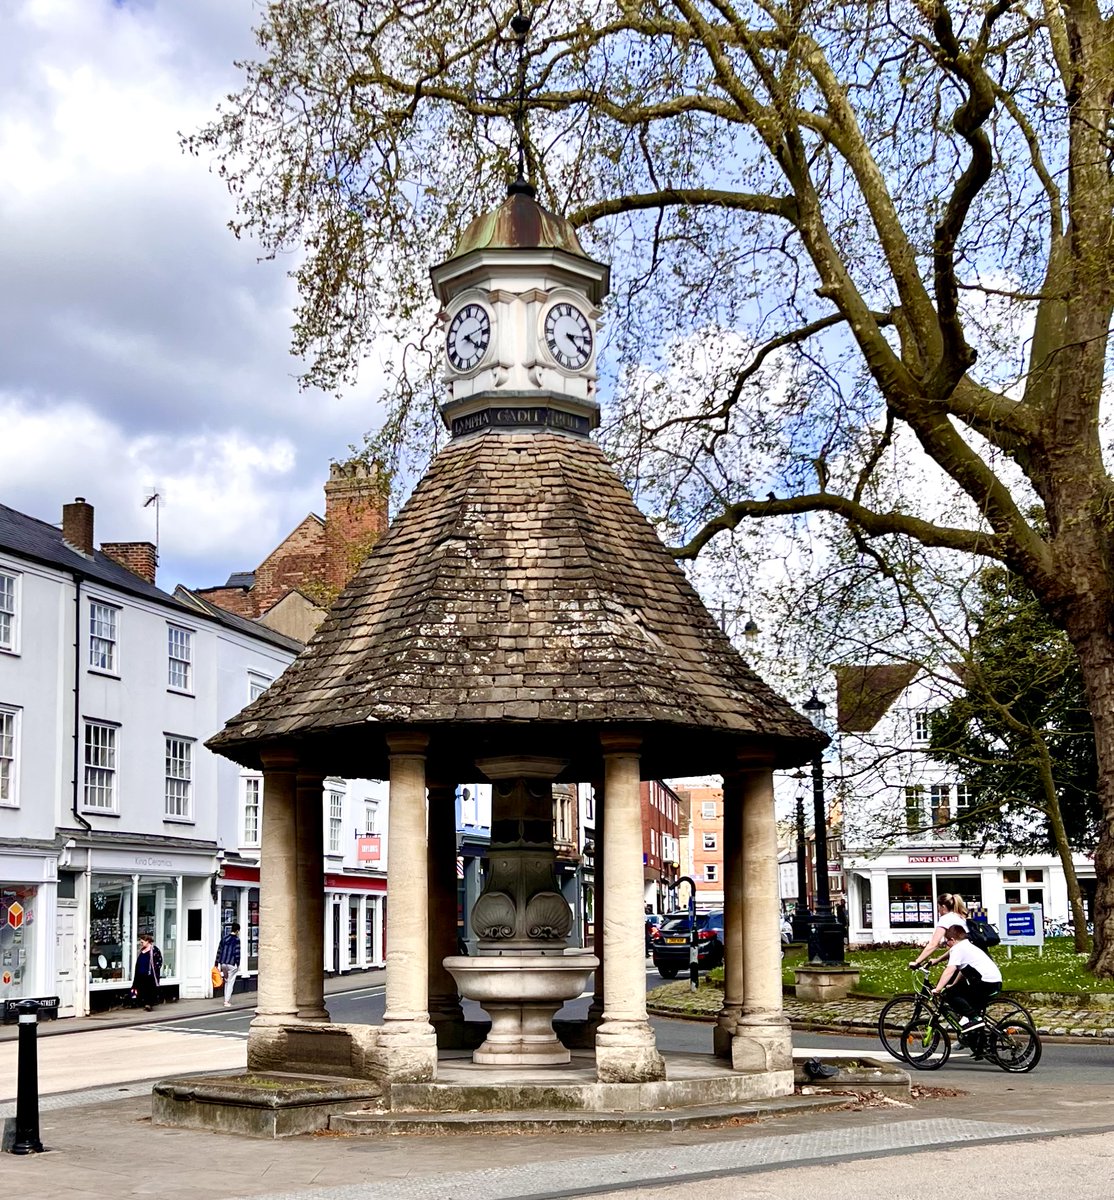 #fountainFriday - the charmingly bonkers Victoria Fountain, Oxford of 1899. 4 spouts set in scallops &  housed under a roof supported on Tuscan columns, topped off with a 4-faced clock and a weathervane.  Just a pity no longer working.